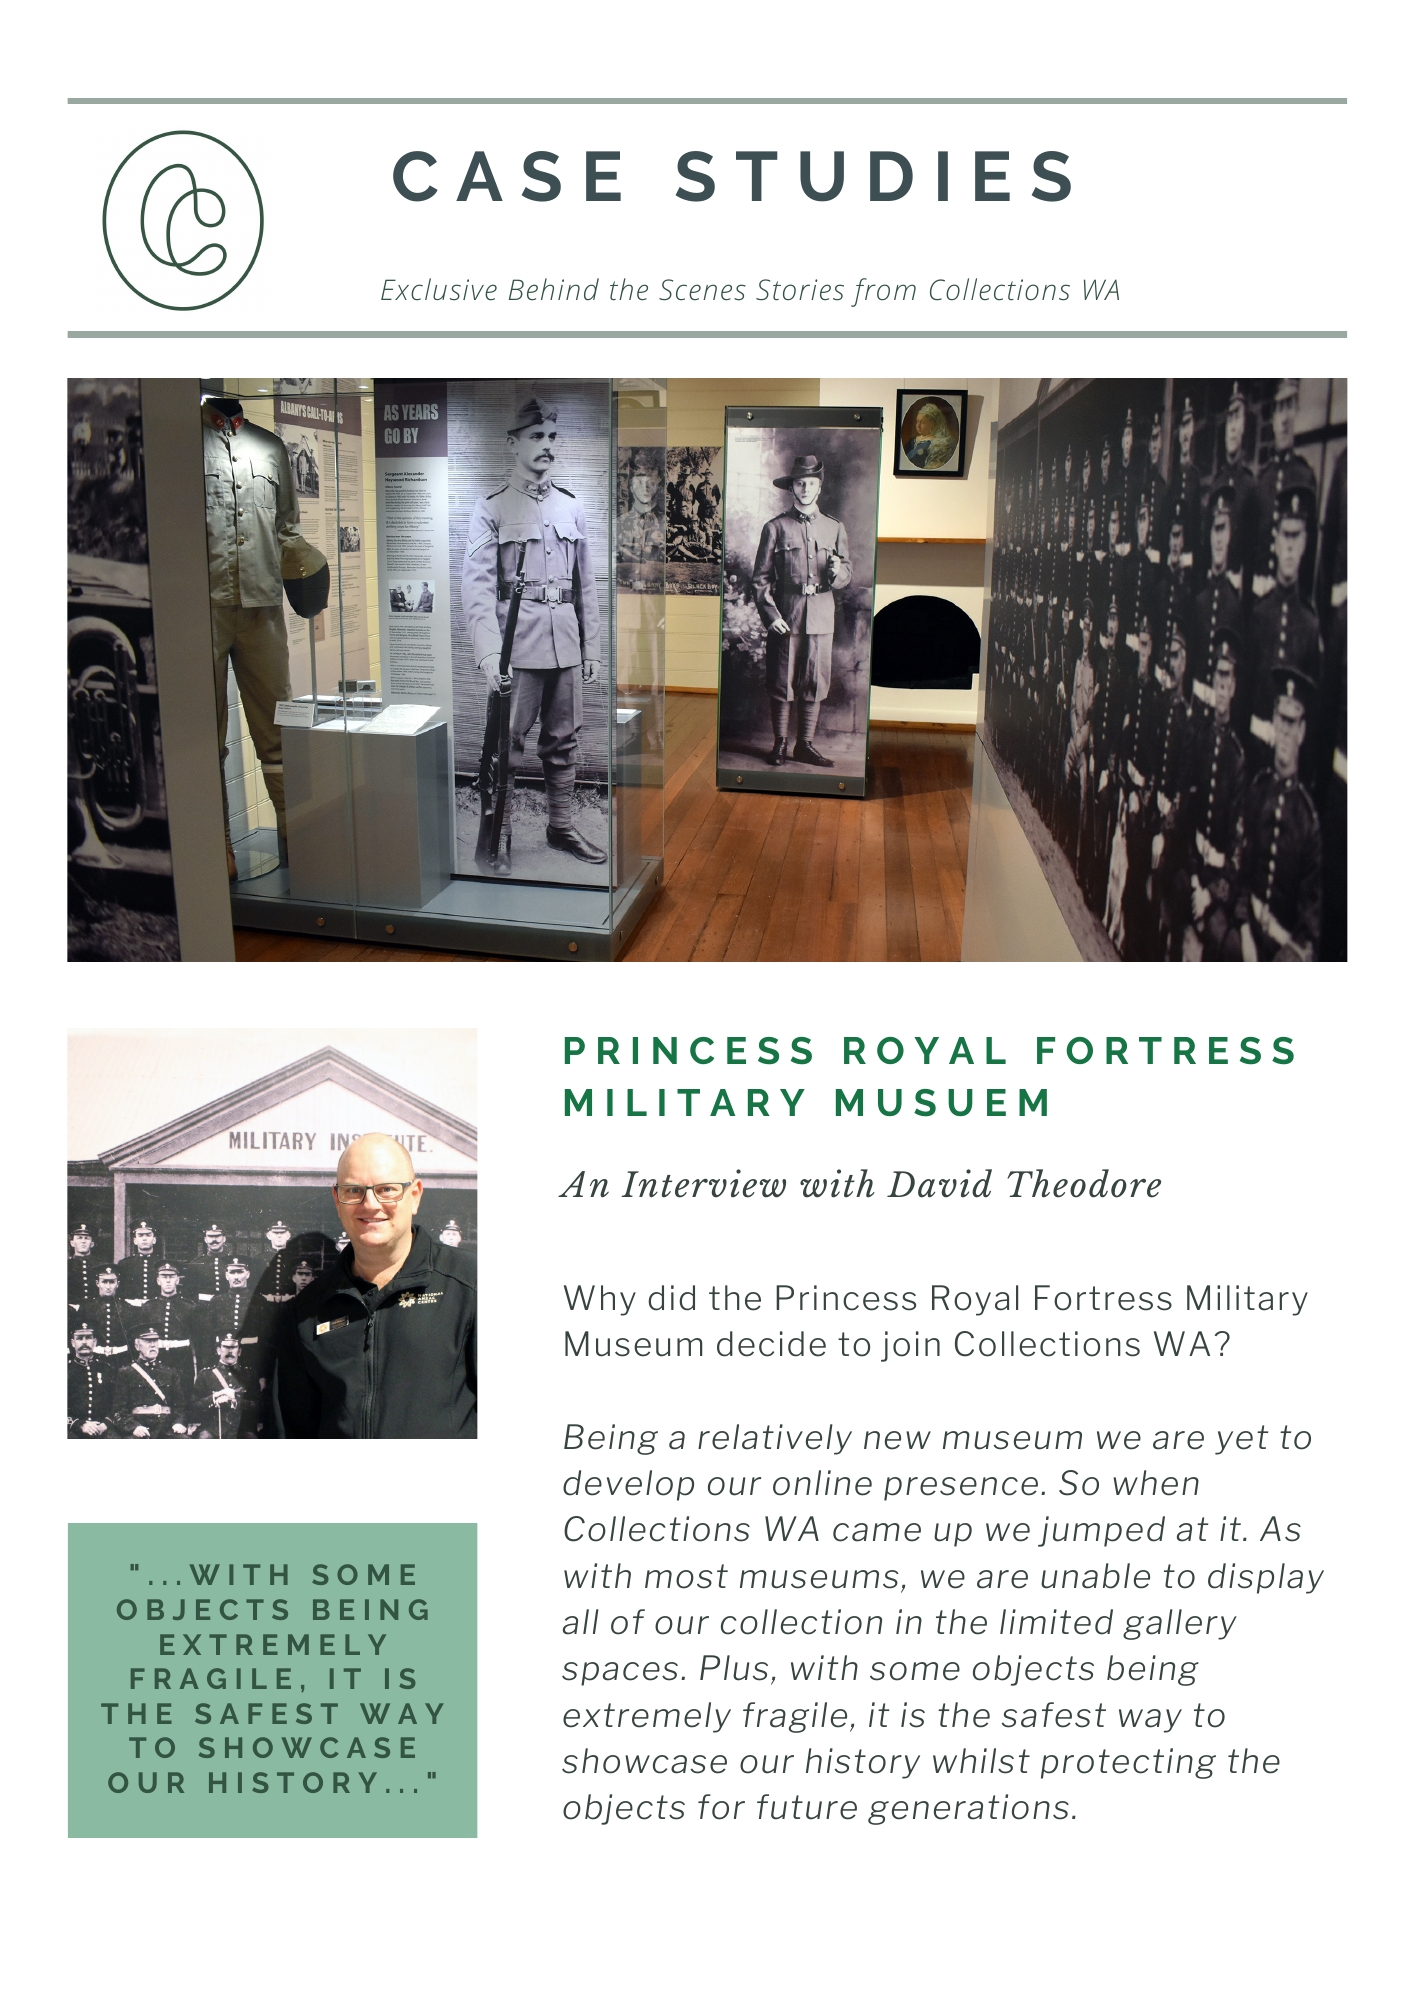 Princess Royal Fortress Military Museum Collections WA Case Study